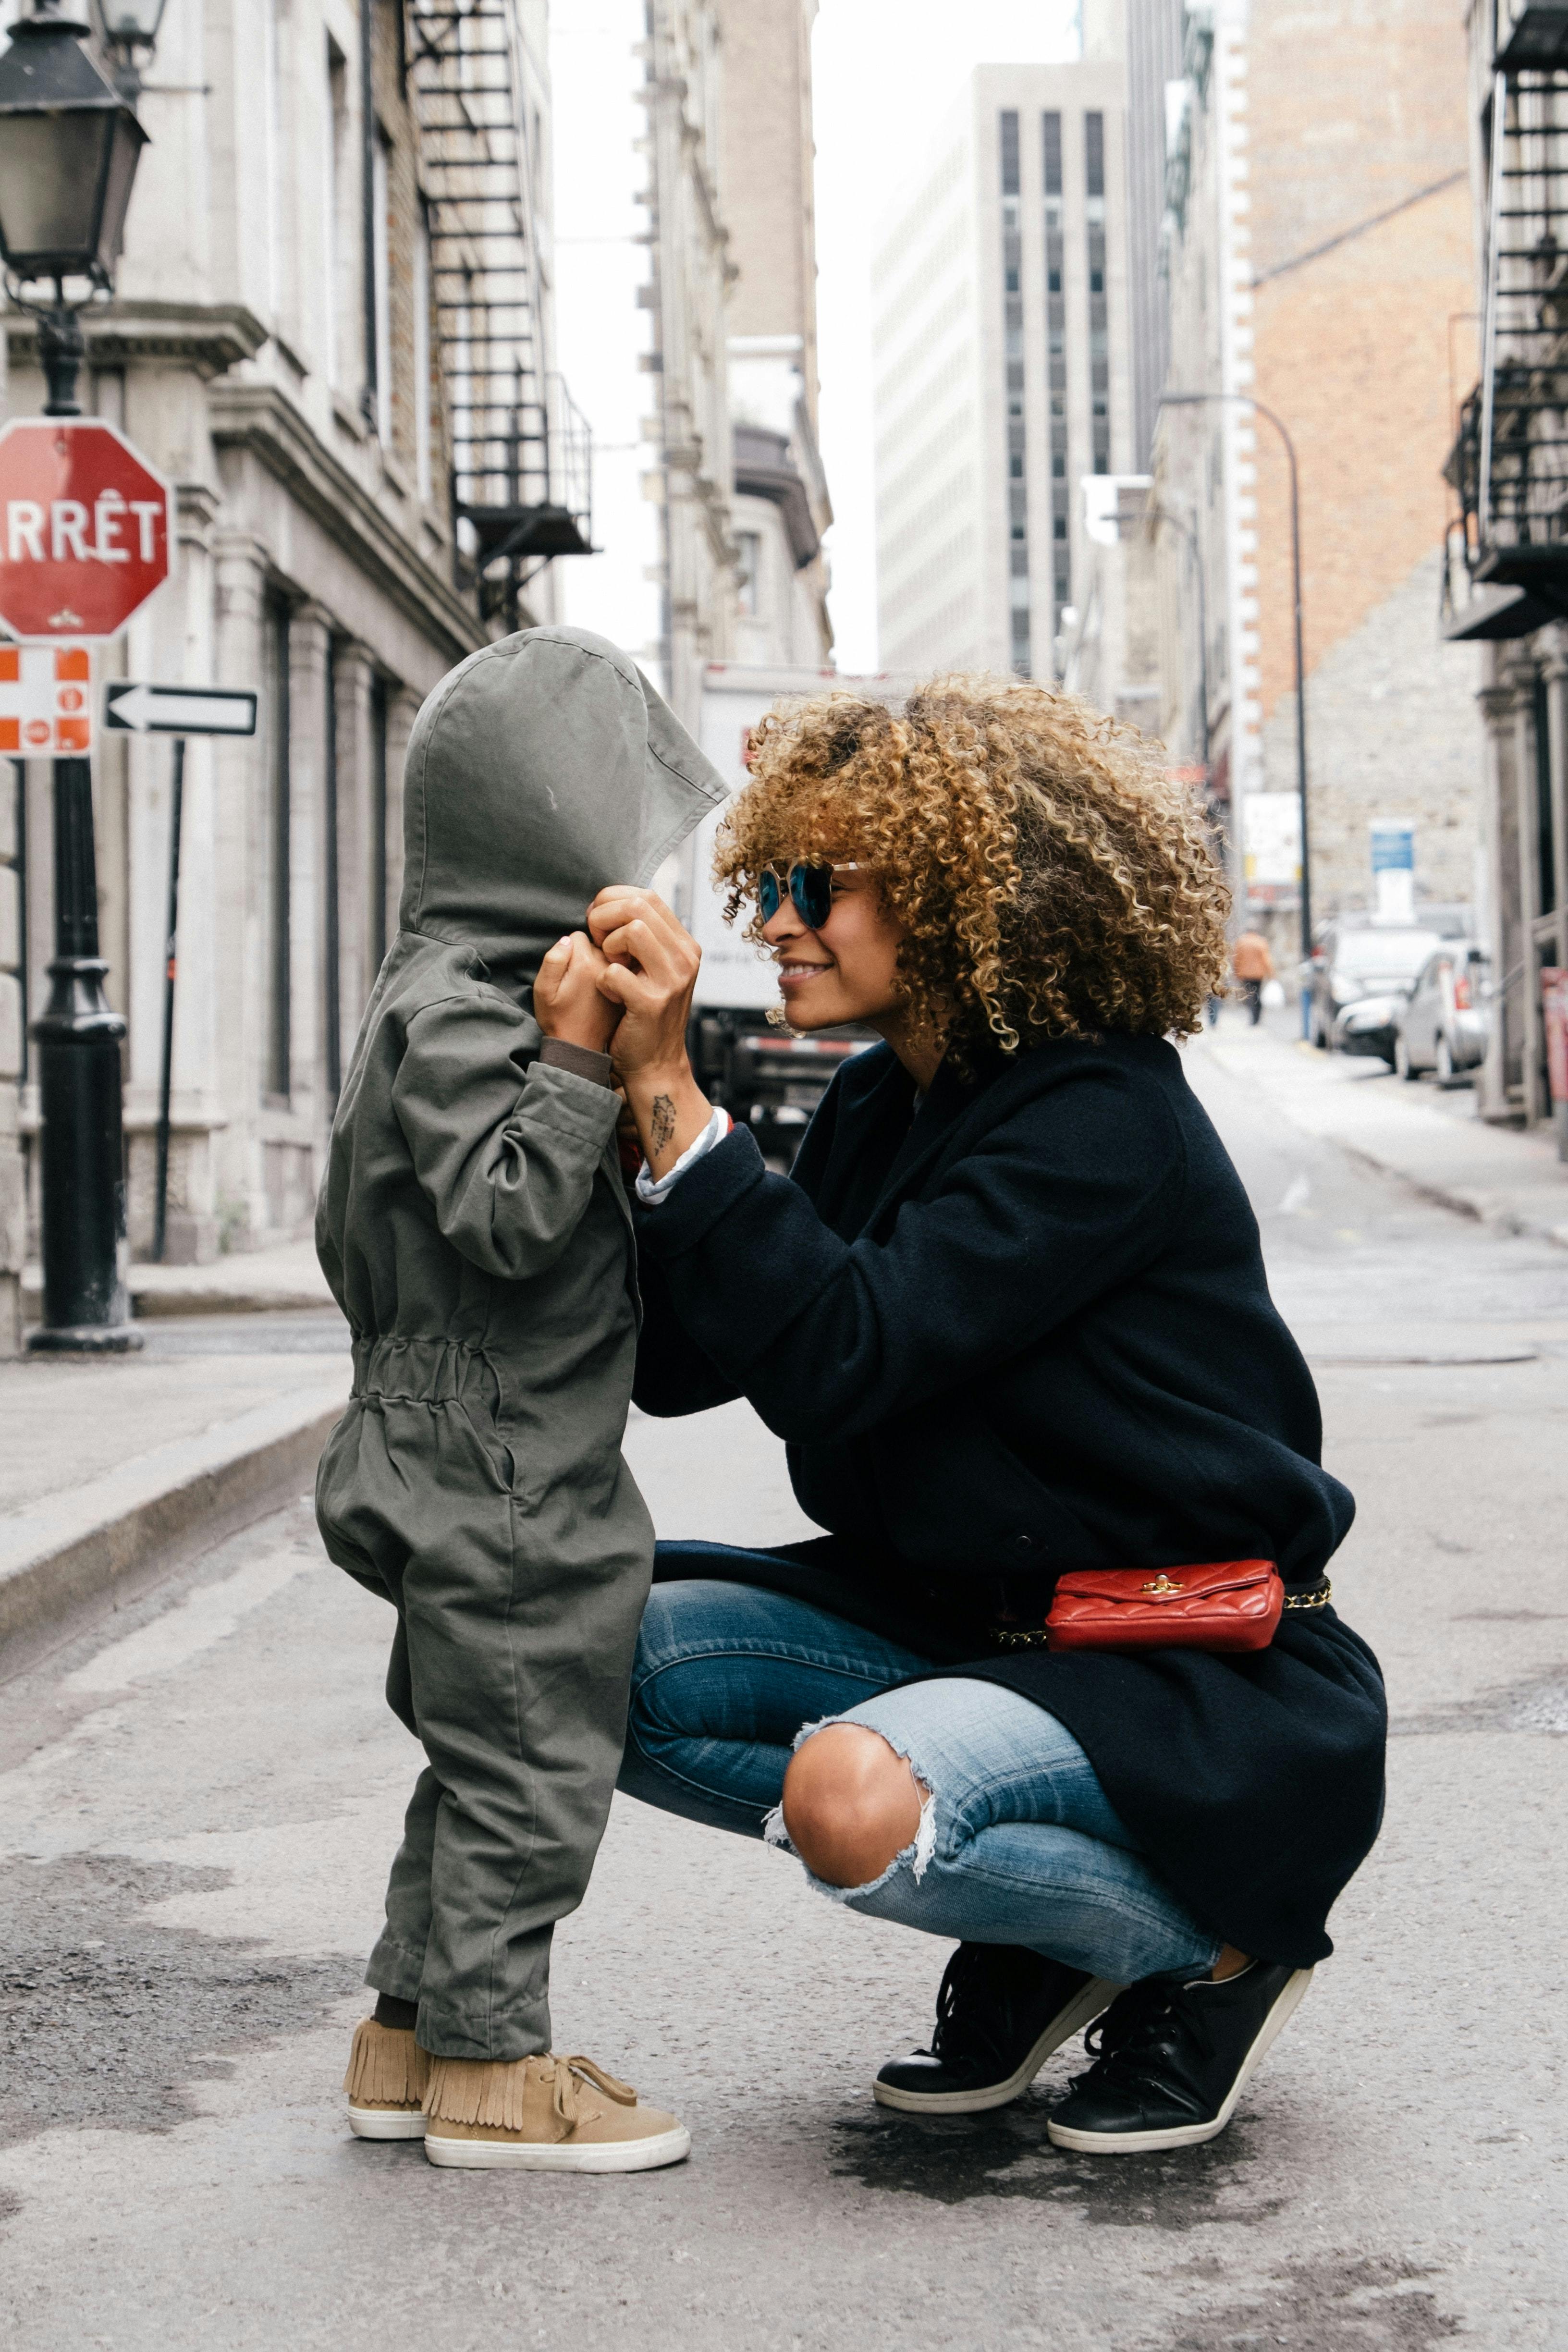 A Black woman with long curly hair wearing sunglasses, a long black coat, a red fanny pack, ripped blue jeans, and black sneakers squats on a city street. She is smiling at and holding hands with a small child. The child is wearing a gray jumpsuit and brown sneakers. The hood of the jumpsuit obscures the child's face.